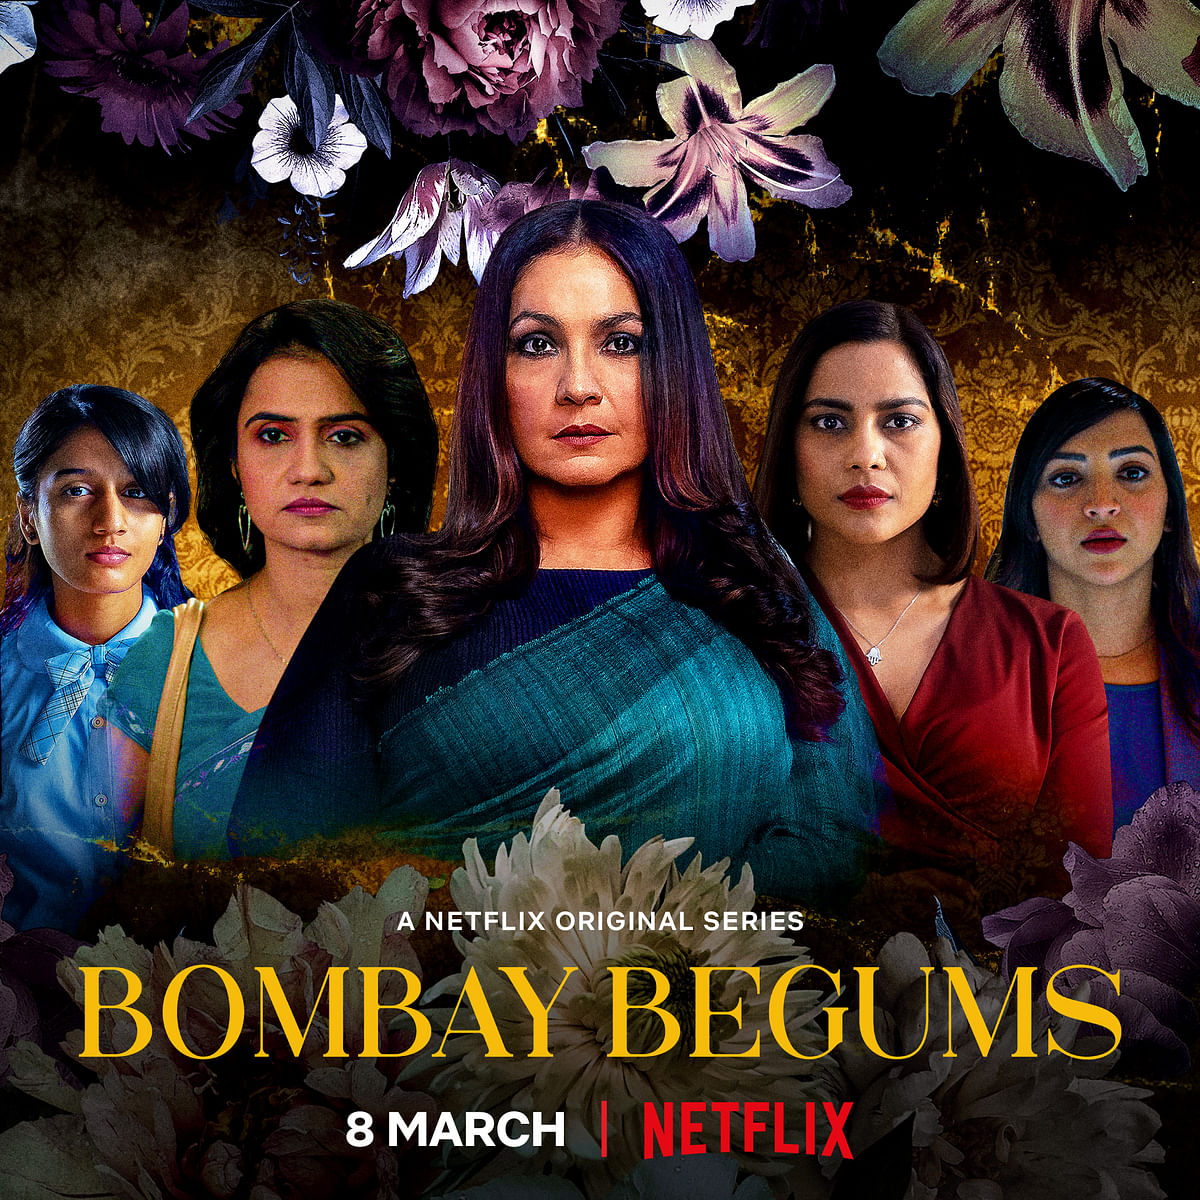 The Child Rights Commission has asked Netflix to stop streaming the show ‘Bombay Begums’.